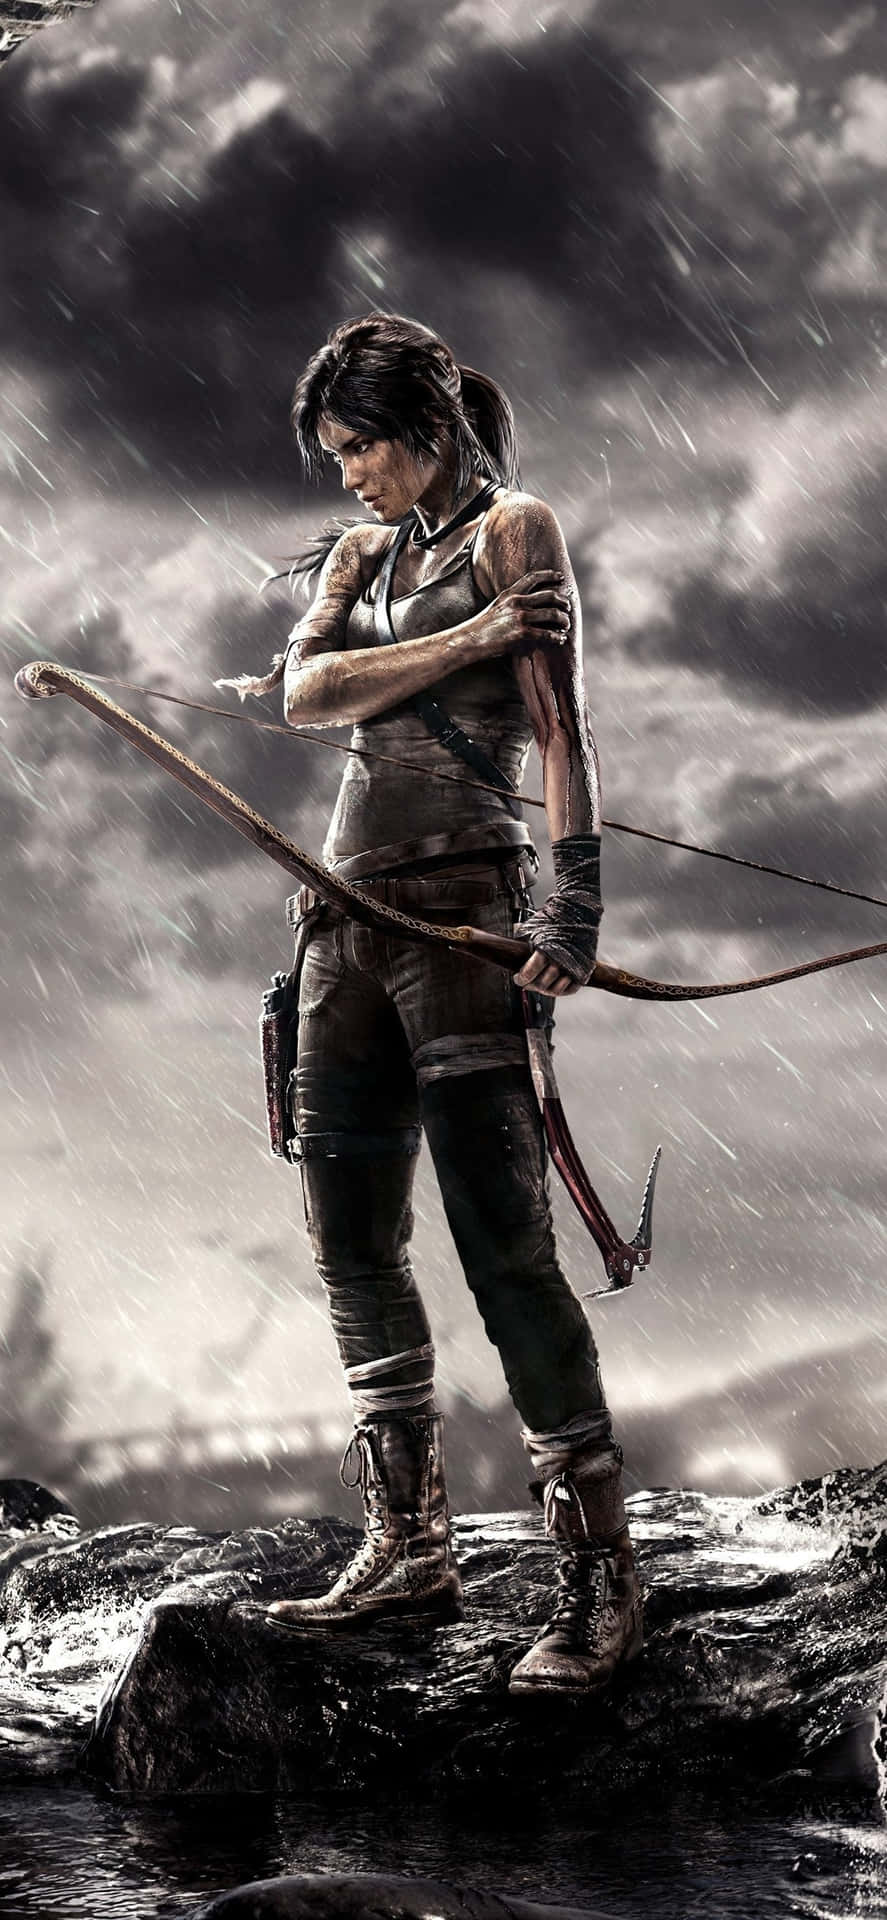 Experience Lara Croft's Tomb Raiding in HD with the Iphone 5s Wallpaper